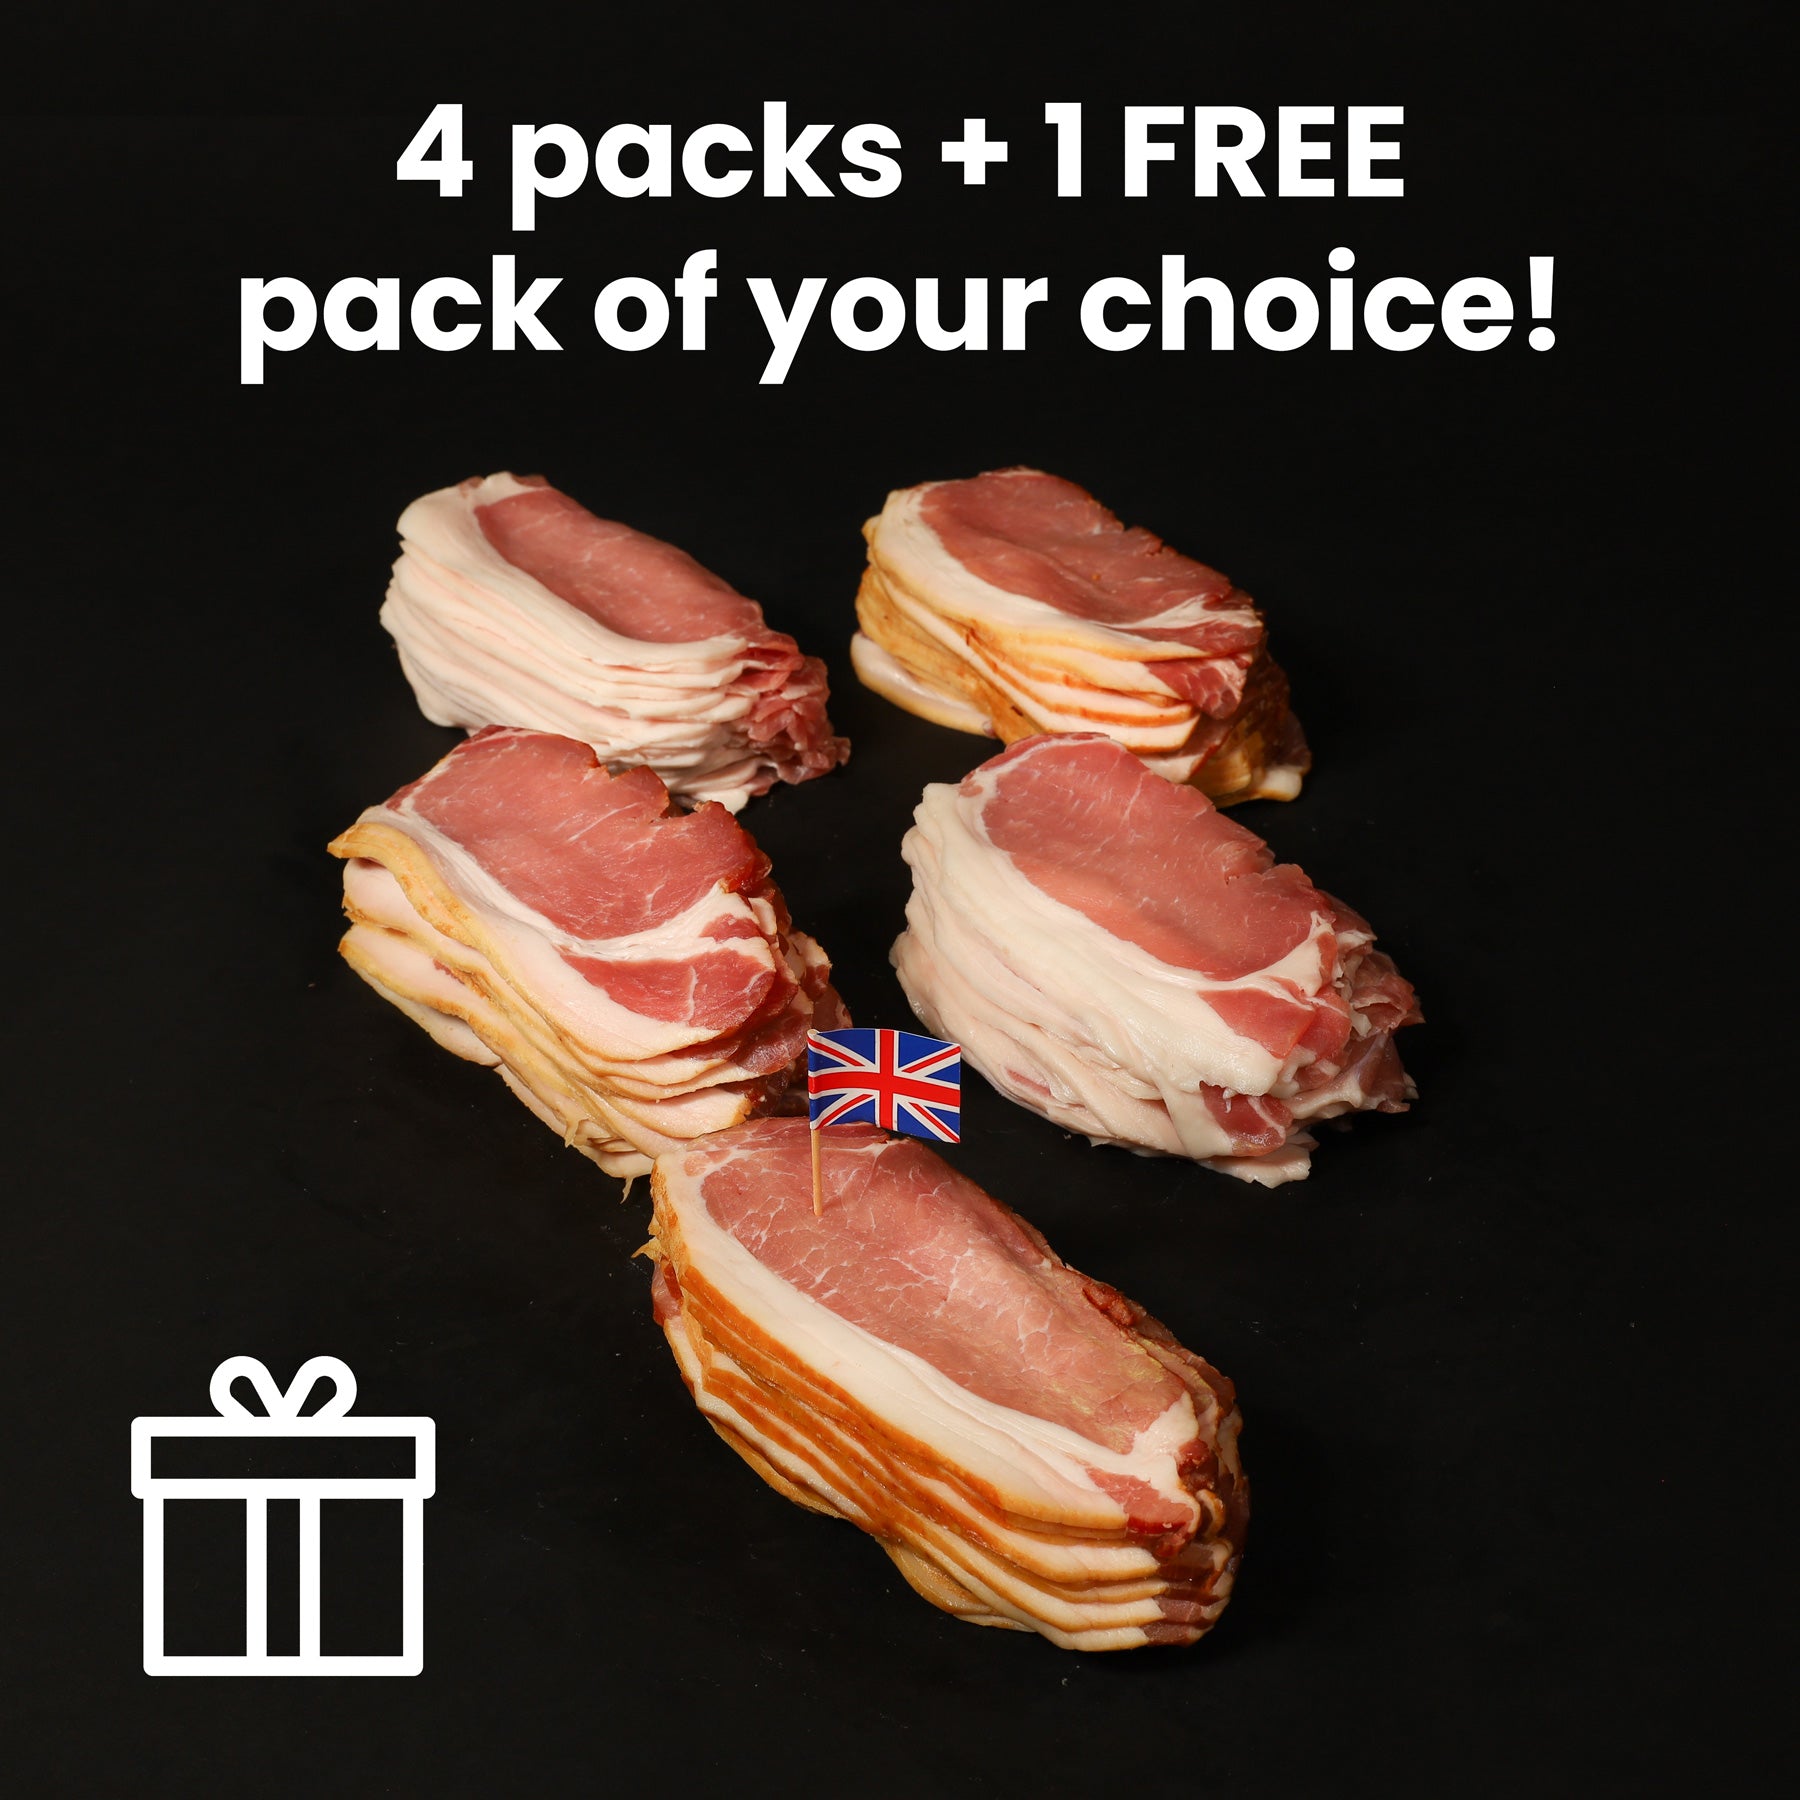 The Super Saver - 4 packs plus 1 FREE pack of your choice!